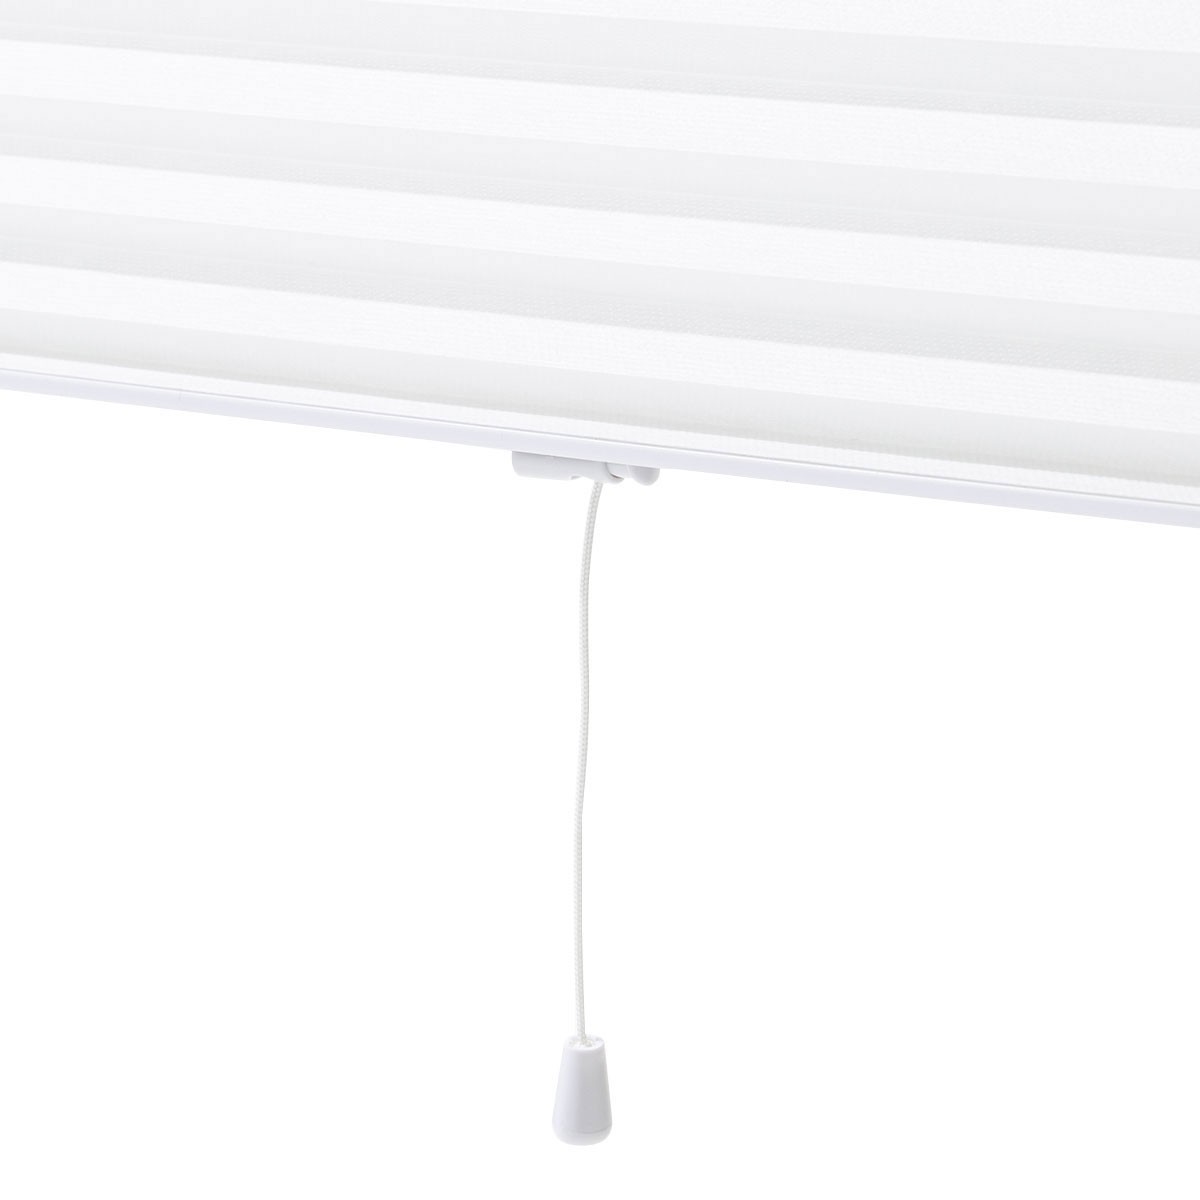  code honeycomb pleat shade (WH58110) width 58× height 110cm.. trim paul (pole) divider heat insulation nitoli